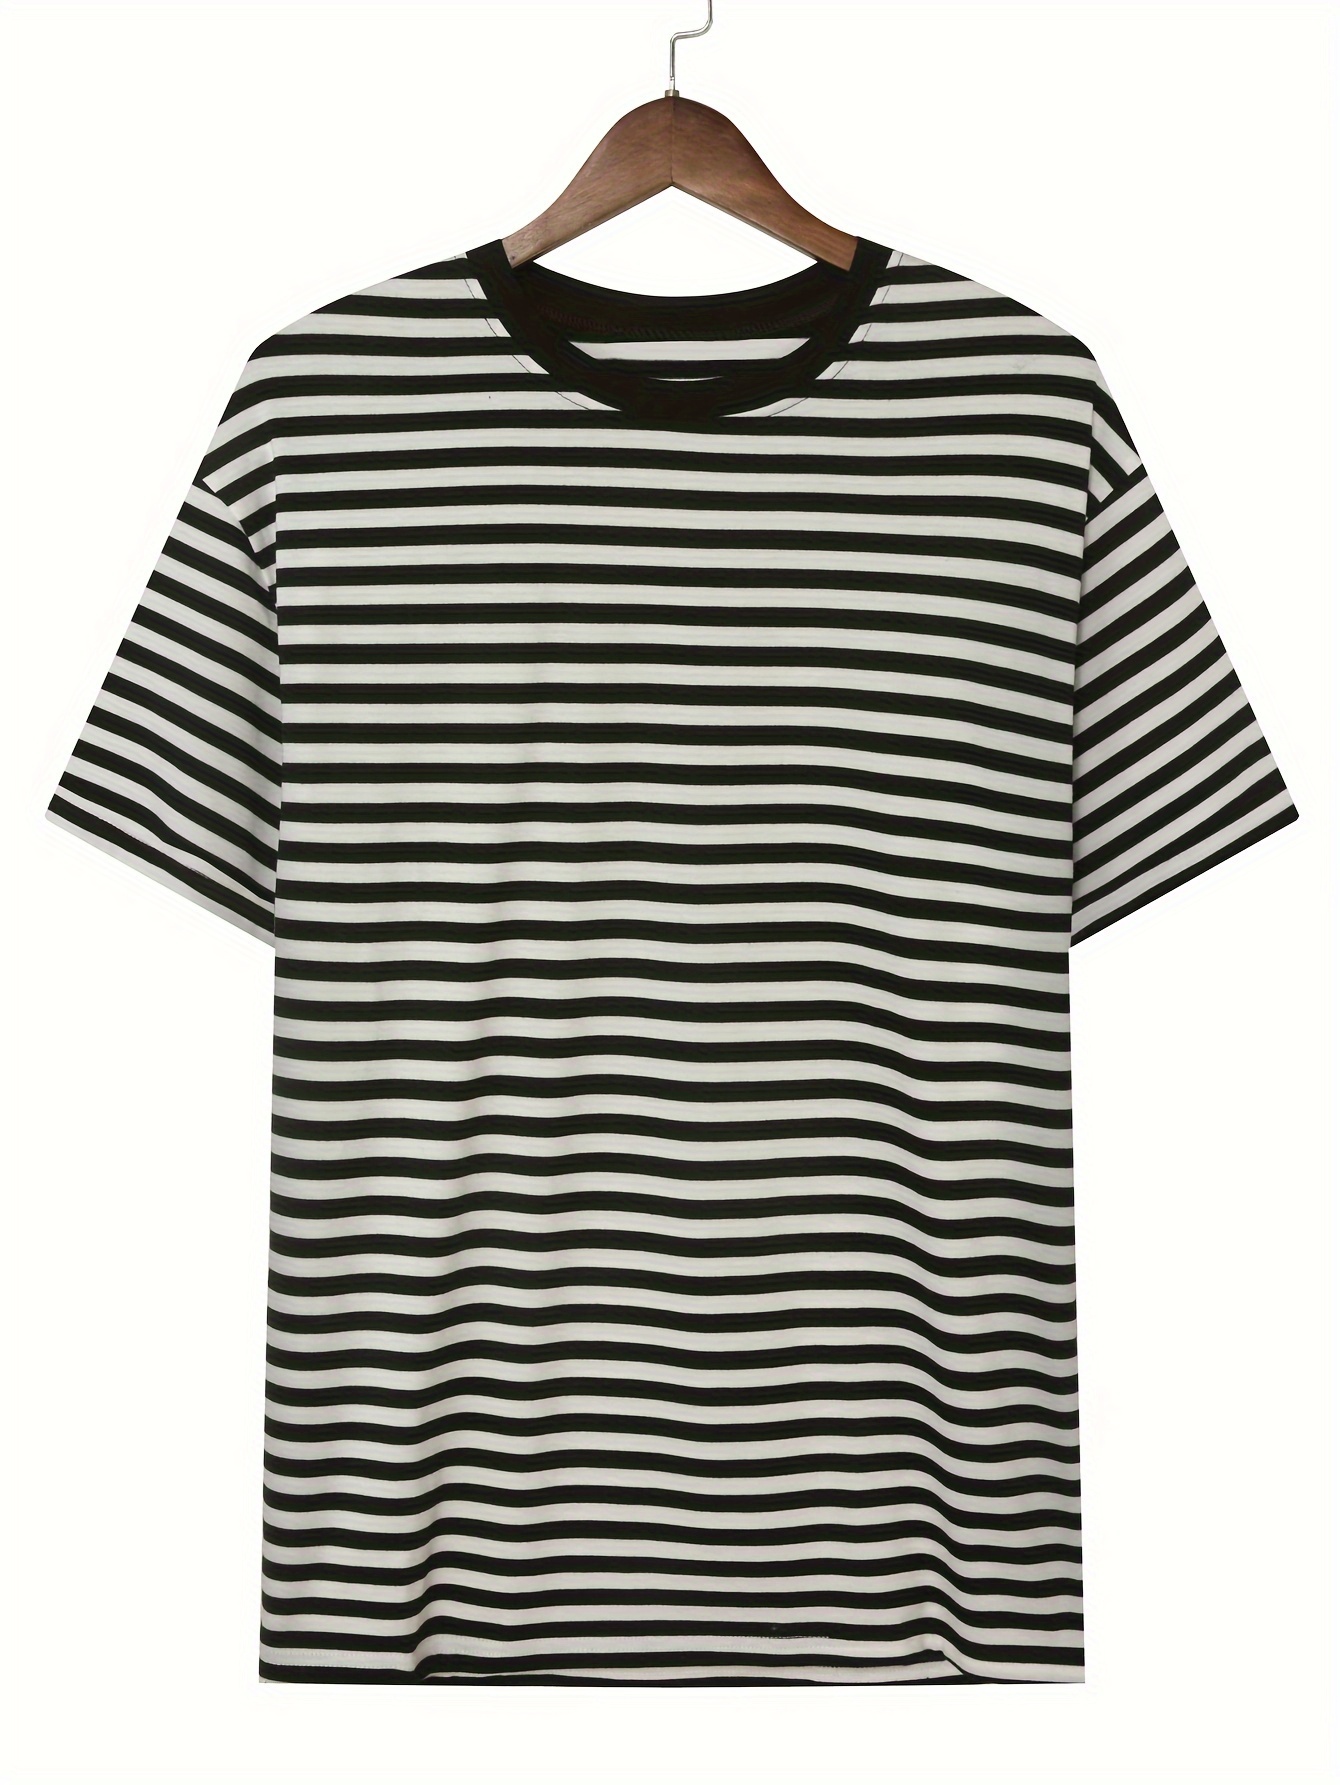 comfy t shirt, stripe pattern print mens comfy t shirt graphic tee mens summer clothes mens outfits details 3